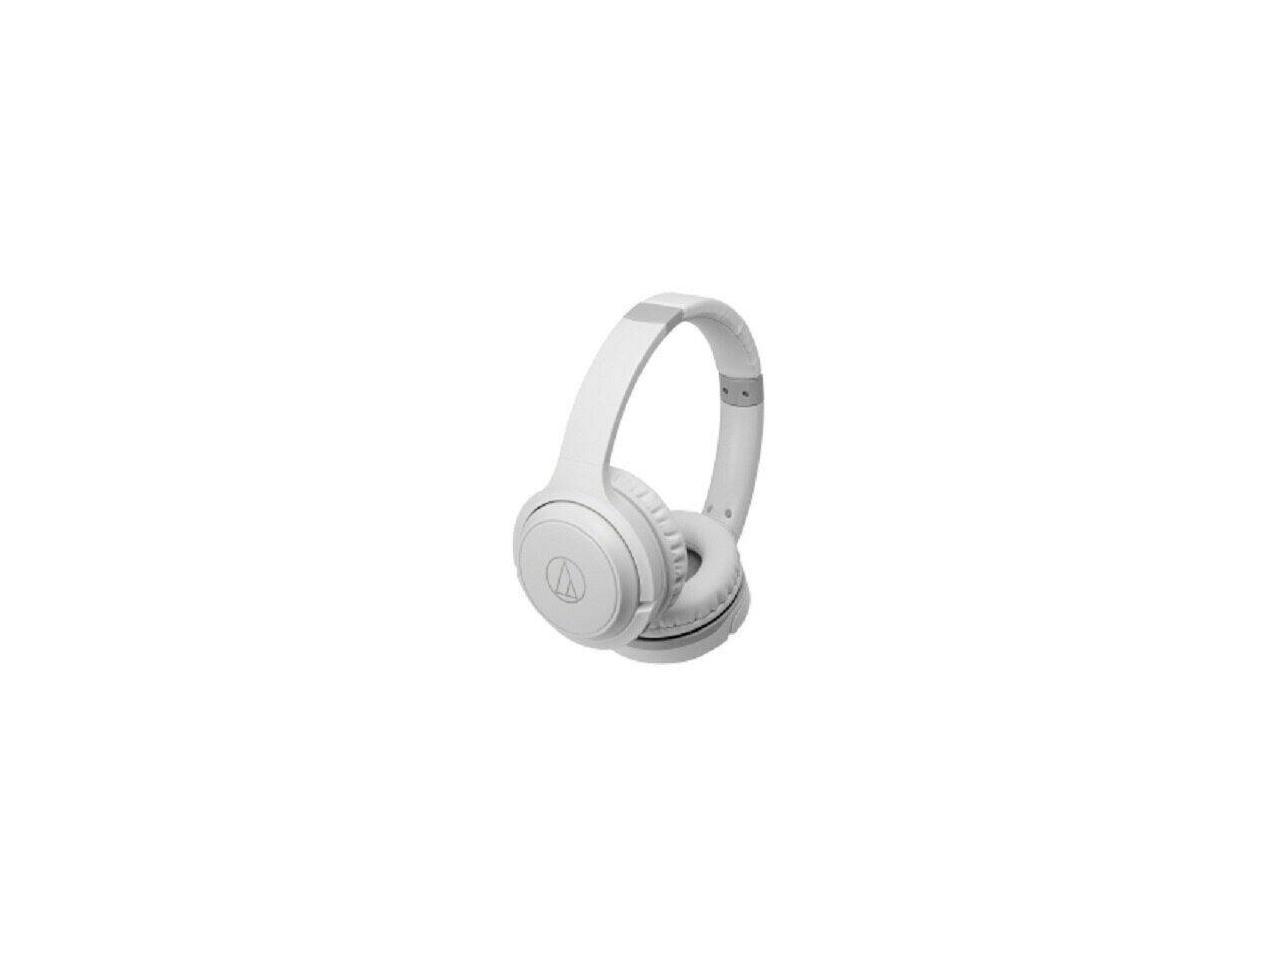 Audio Technica ATH-S200BTWH Wireless On-Ear Headphones with Built-In Mic/Control- White